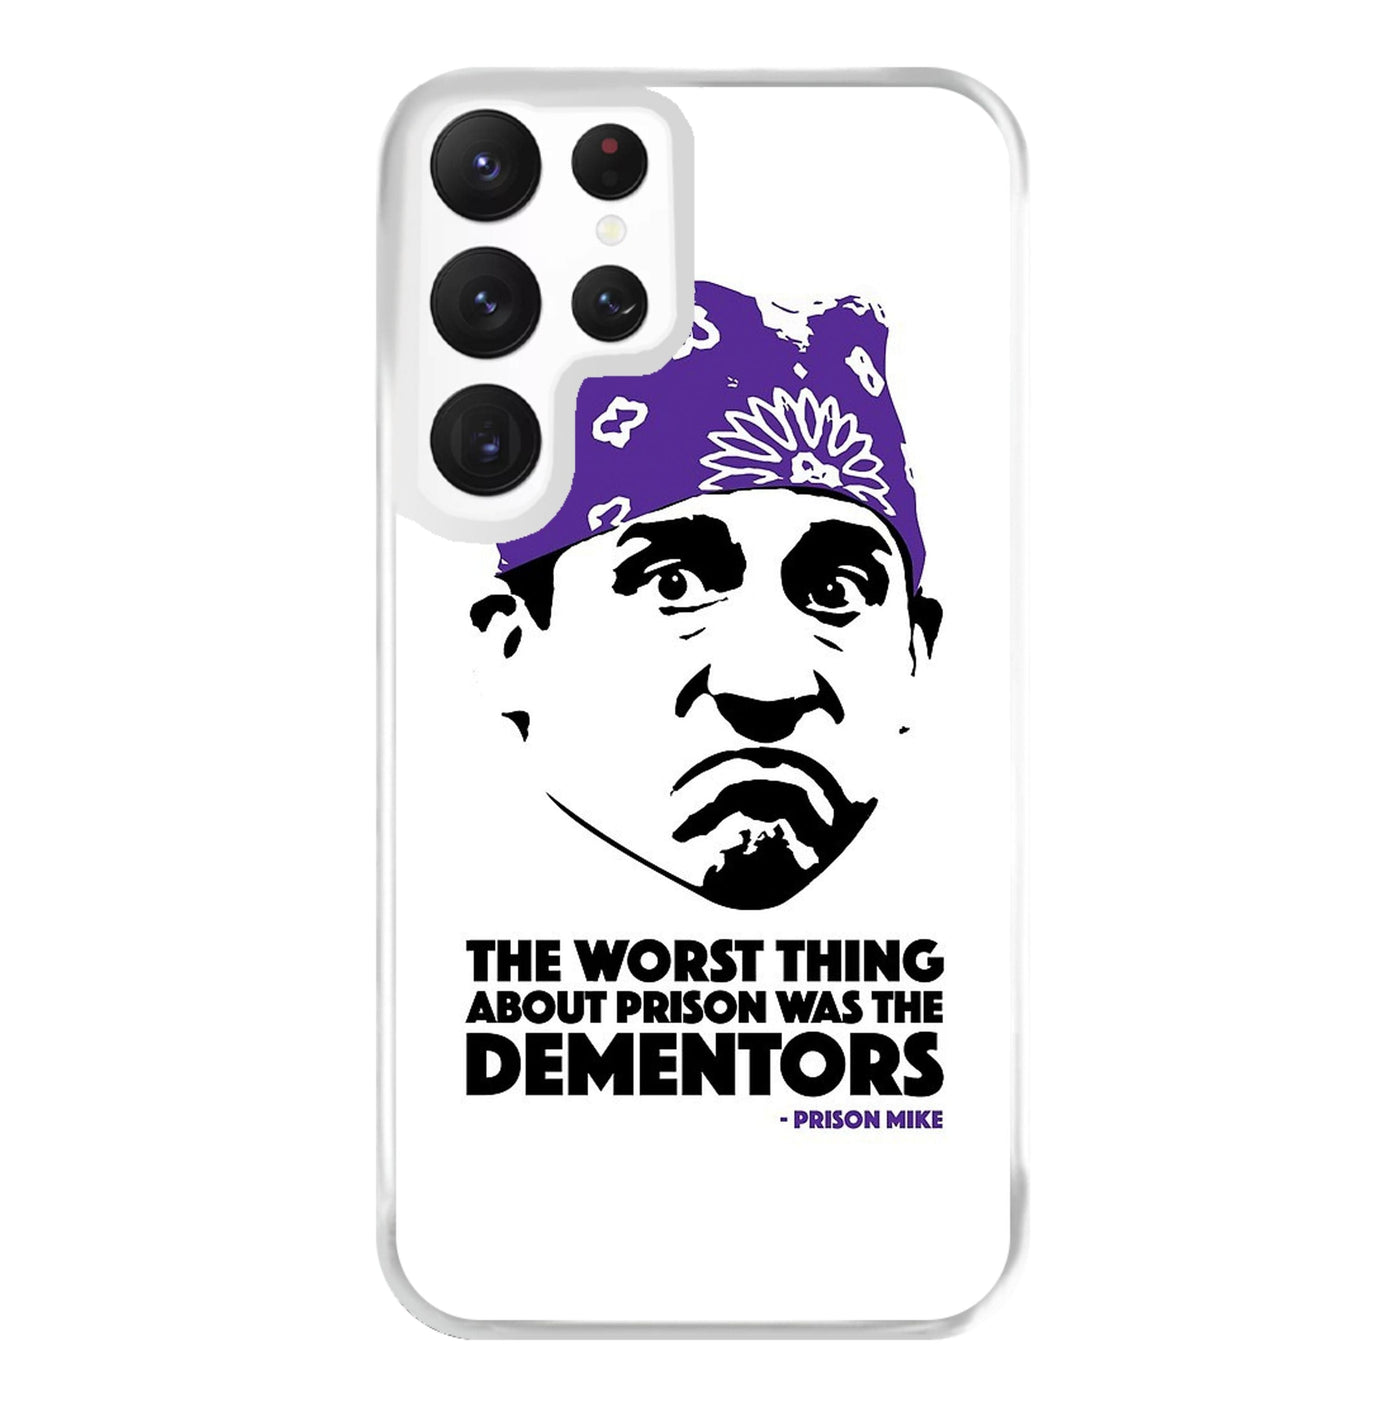 Prison Mike vs The Dementors - The Office Phone Case